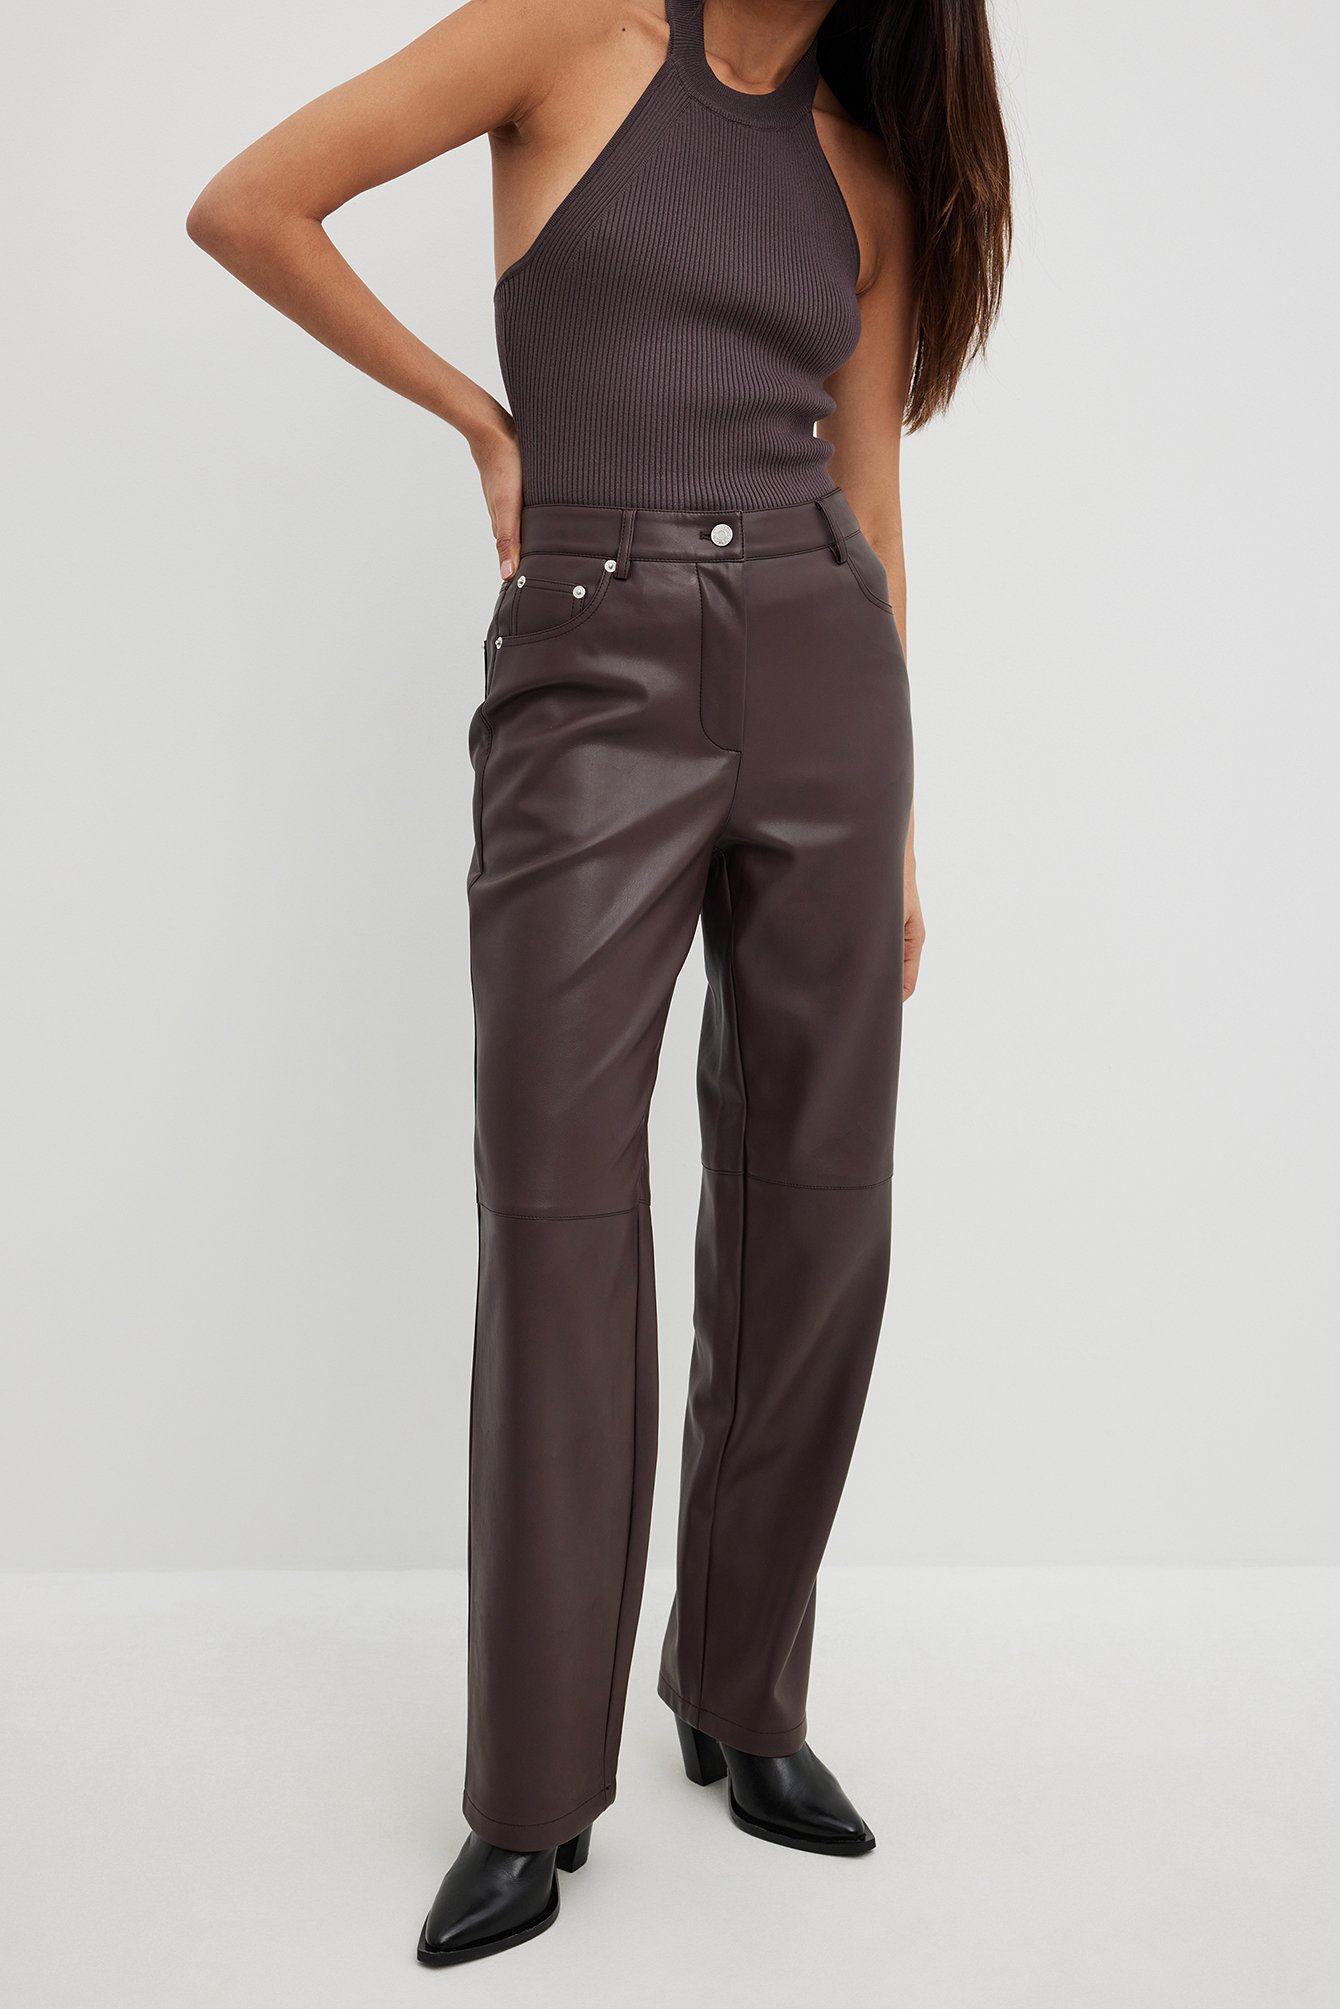 Clothing  Trousers  Inaya Dark Brown Stretch Vegan Leather Trousers